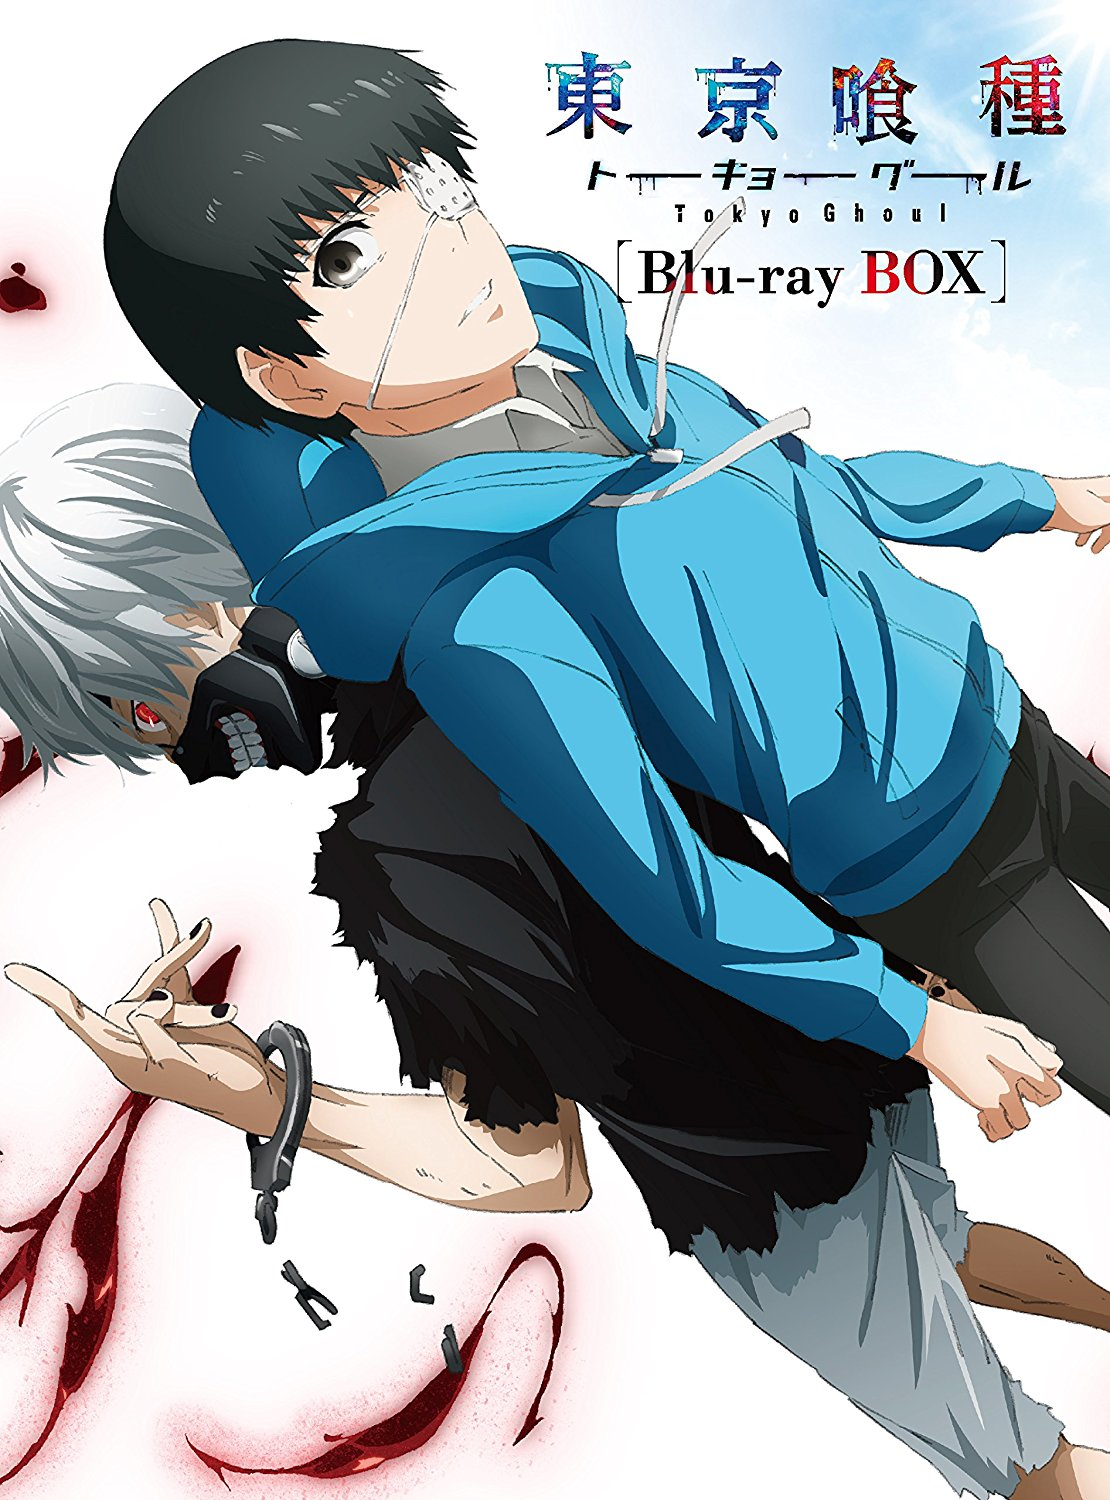 Tokyo Ghoul's Anime Hides the True Horror of Kaneki's Torture